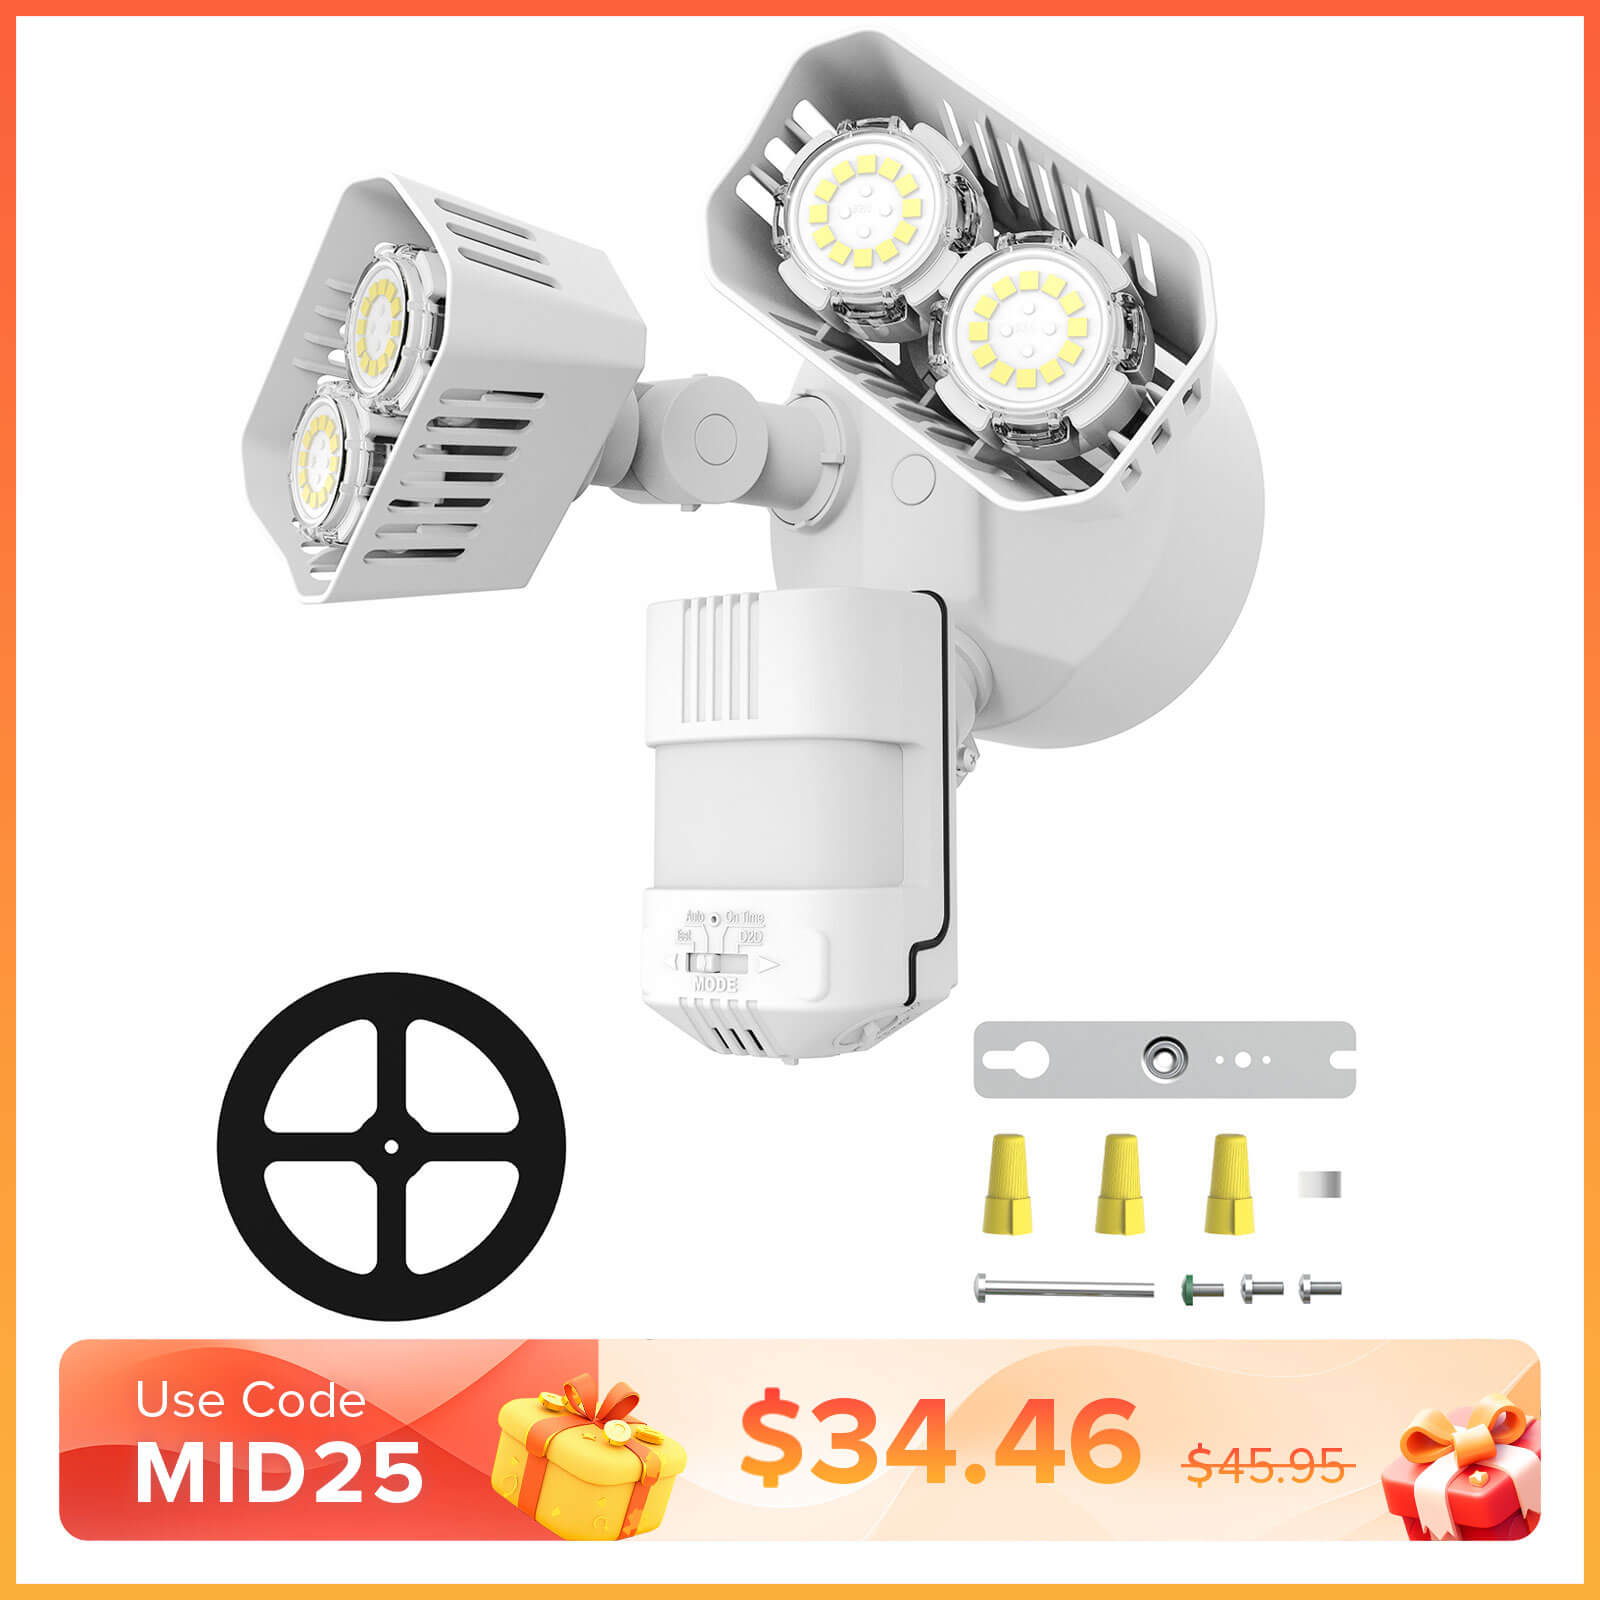 Upgraded 28W LED Security Light (Dusk to Dawn & Motion Sensor)(US ONLY)